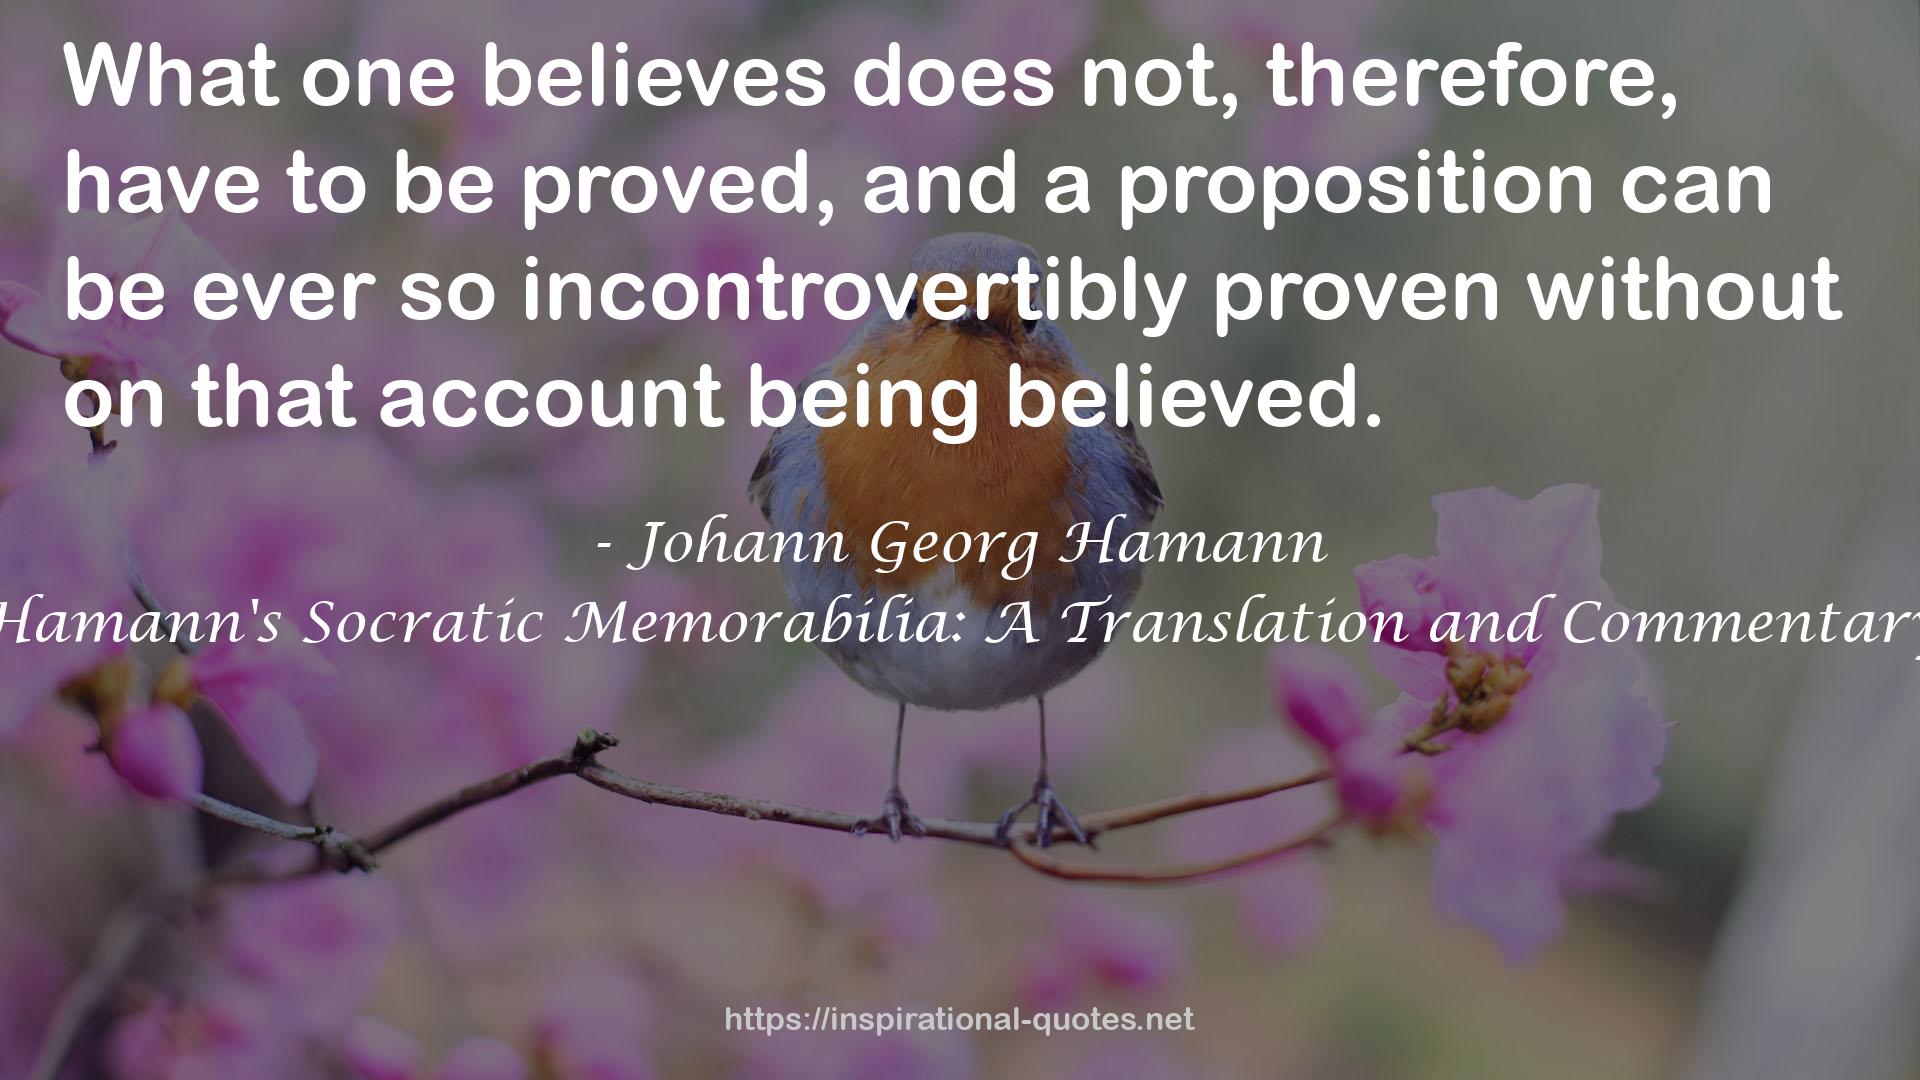 Hamann's Socratic Memorabilia: A Translation and Commentary QUOTES